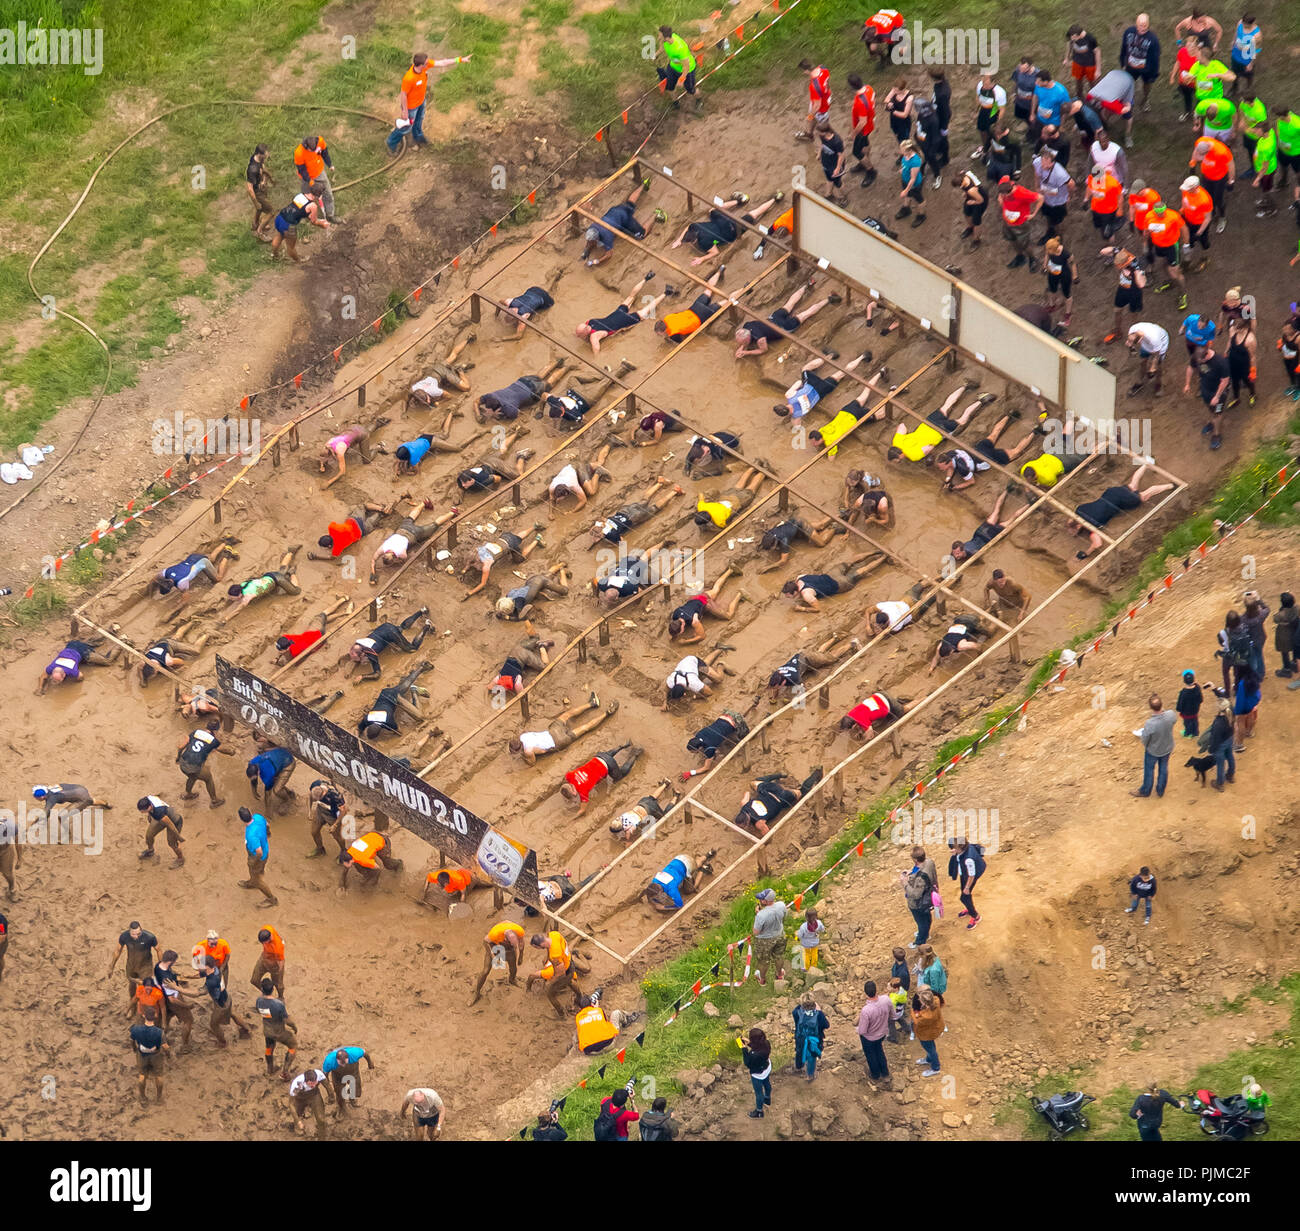 Extreme sports, mud track with barbed wire fence, Tough Mudder - the ultimate mud battle in Sauerland, near Schloss Herdringen, Arnsberg, Sauerland, North Rhine-Westphalia, Germany Stock Photo